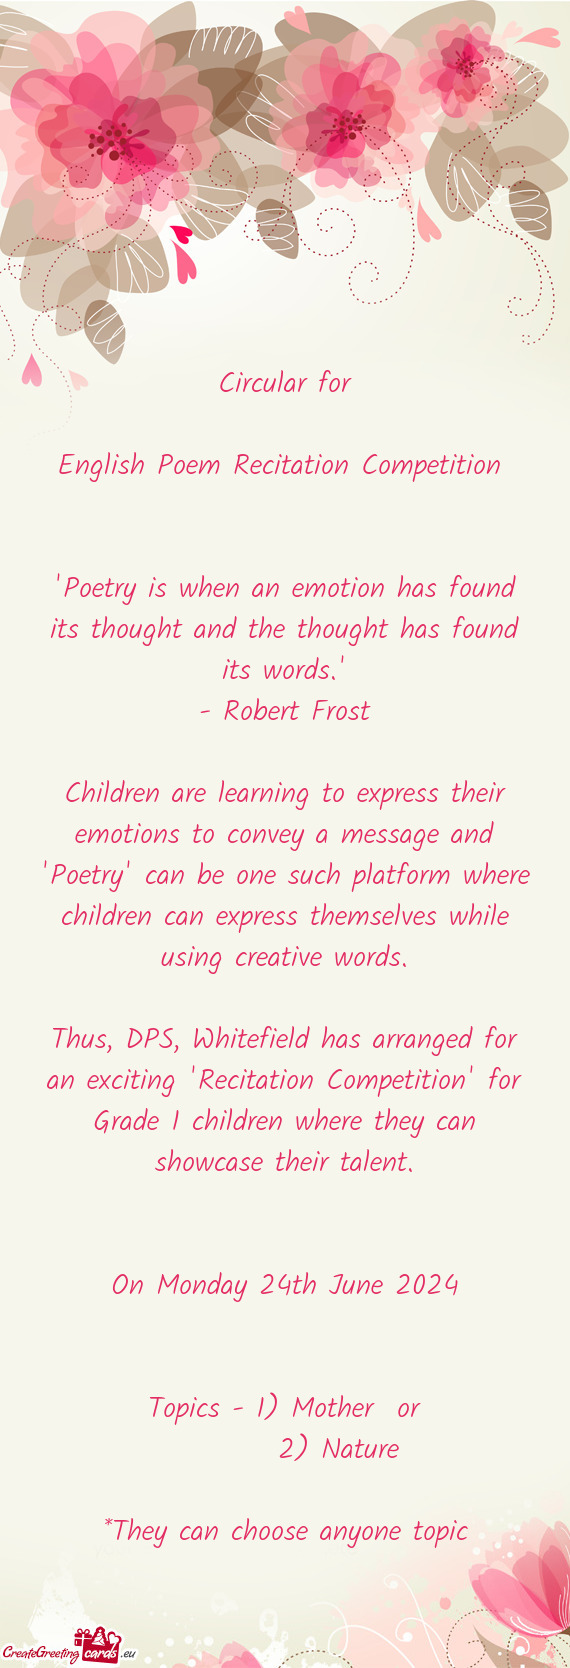 "Poetry is when an emotion has found its thought and the thought has found its words."